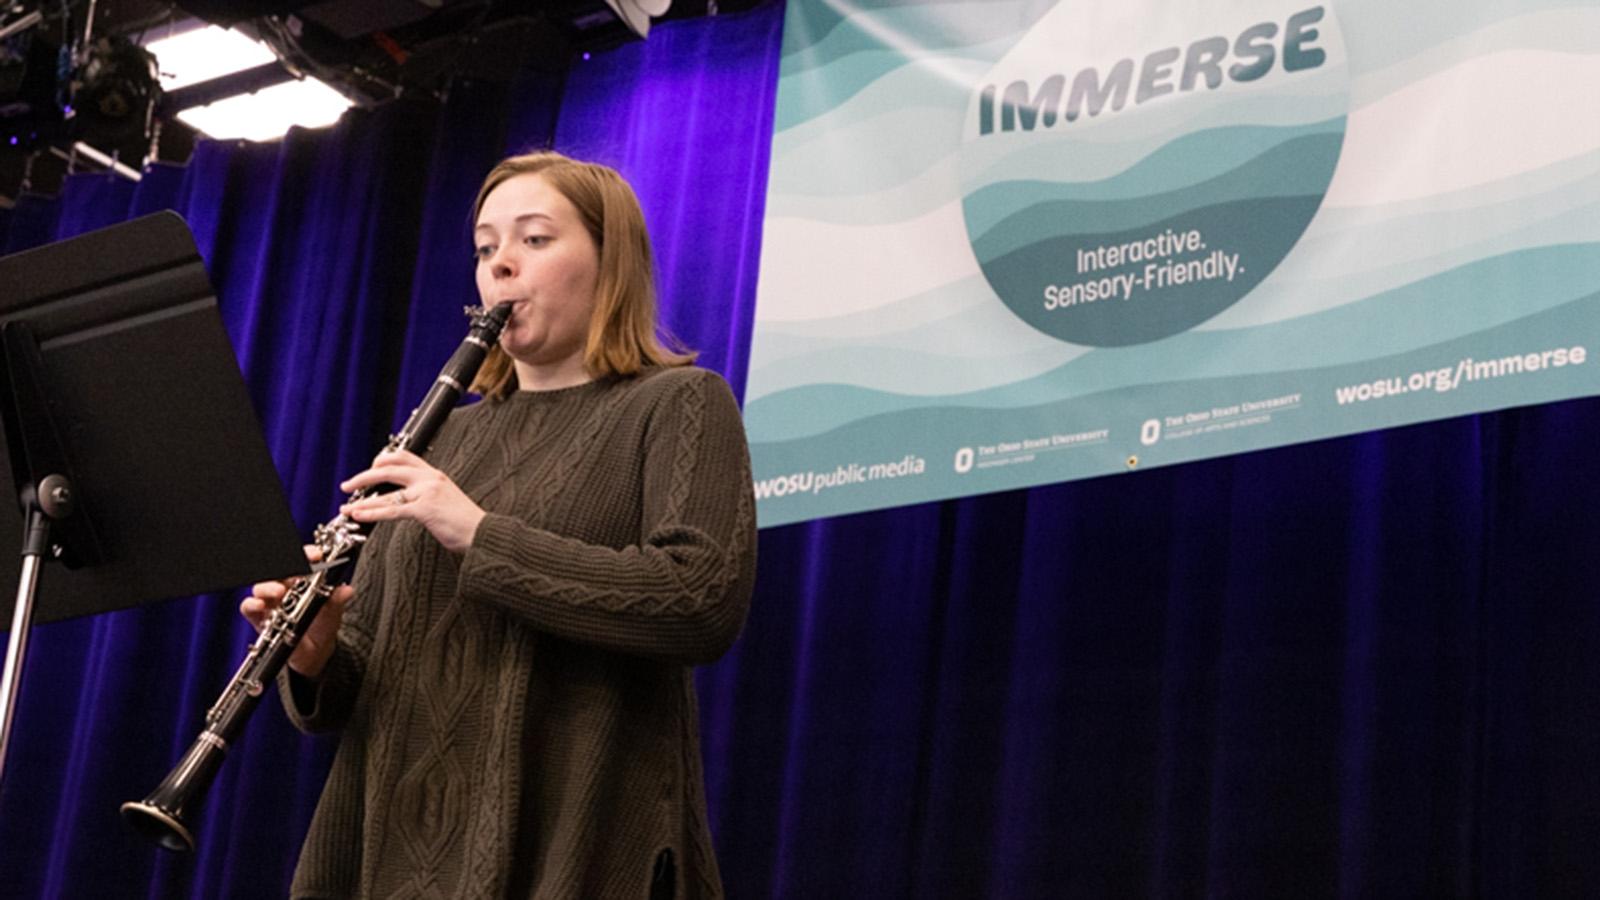 Clarinetist Kaleigh performing at Immerse concert